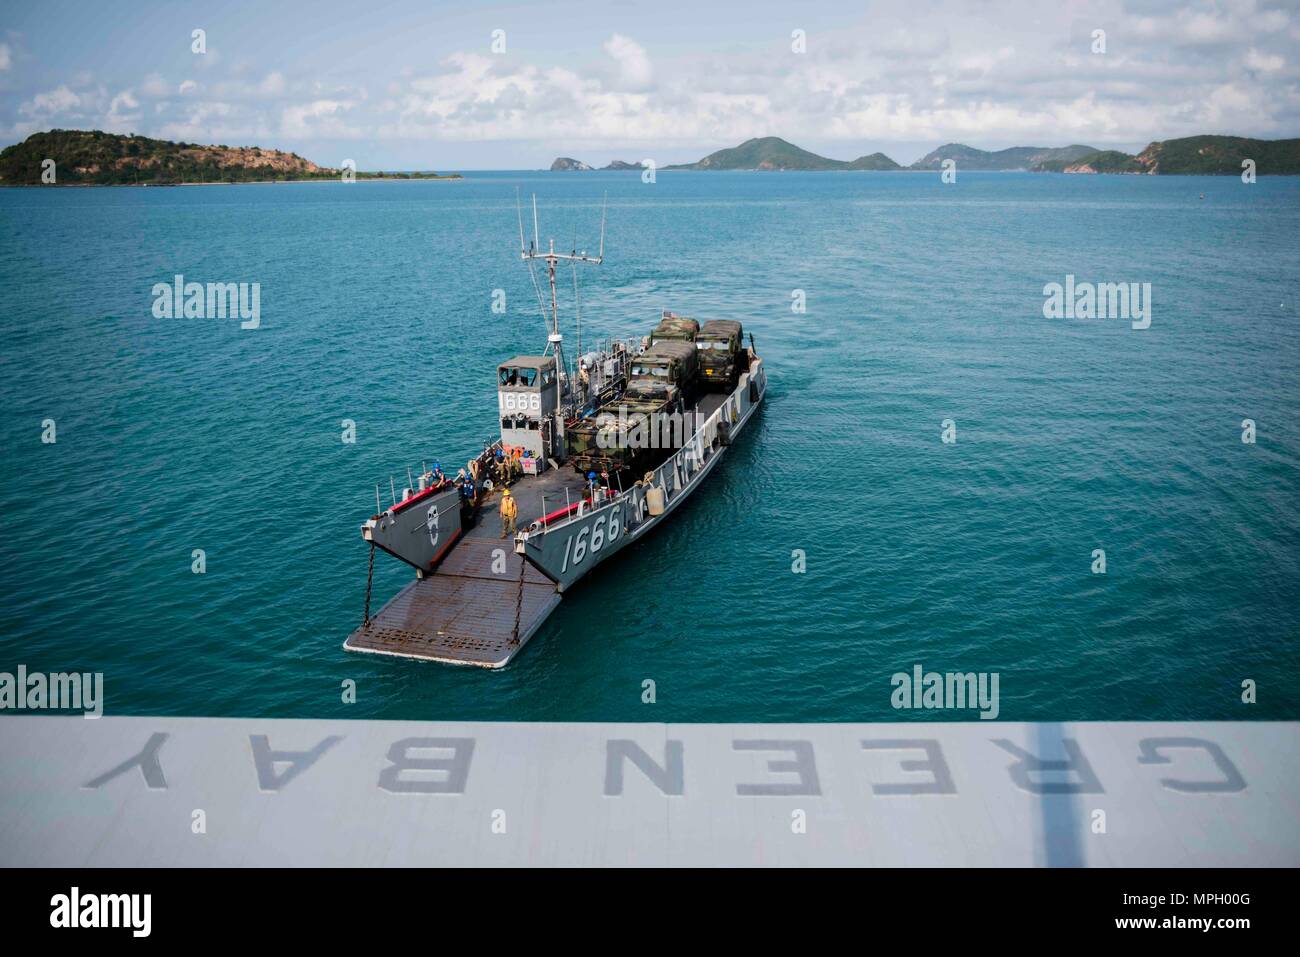 170224-N-JH293-017 SATTAHIP, Thailand (Feb. 24, 2017) Landing craft utility 1666, assigned to Naval Beach Unit 7, prepares to embark the well deck of the amphibious transport dock ship USS Green Bay (LPD 20) during Exercise Cobra Gold 2017. Cobra Gold is the largest Theater Security Cooperation exercise in the Indo-Asia-Pacific region and is an integral part of the U.S. commitment to strengthen engagement in the region. (U.S. Navy photo by Mass Communication Specialist 1st Class Chris Williamson/Released) Stock Photo